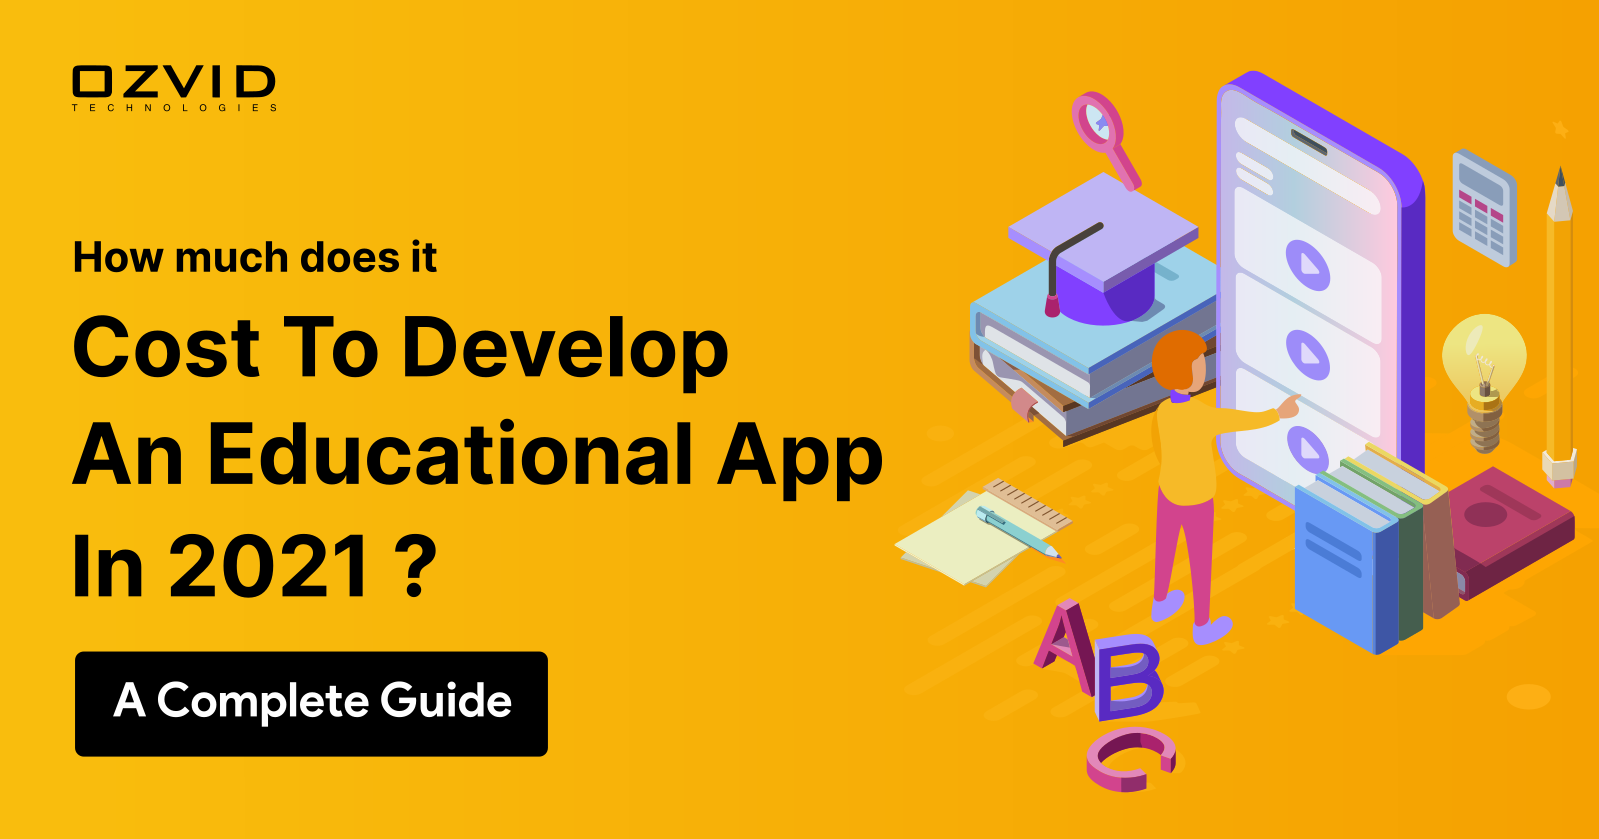 A Complete Guide to Building a Successful Educational App in 2021